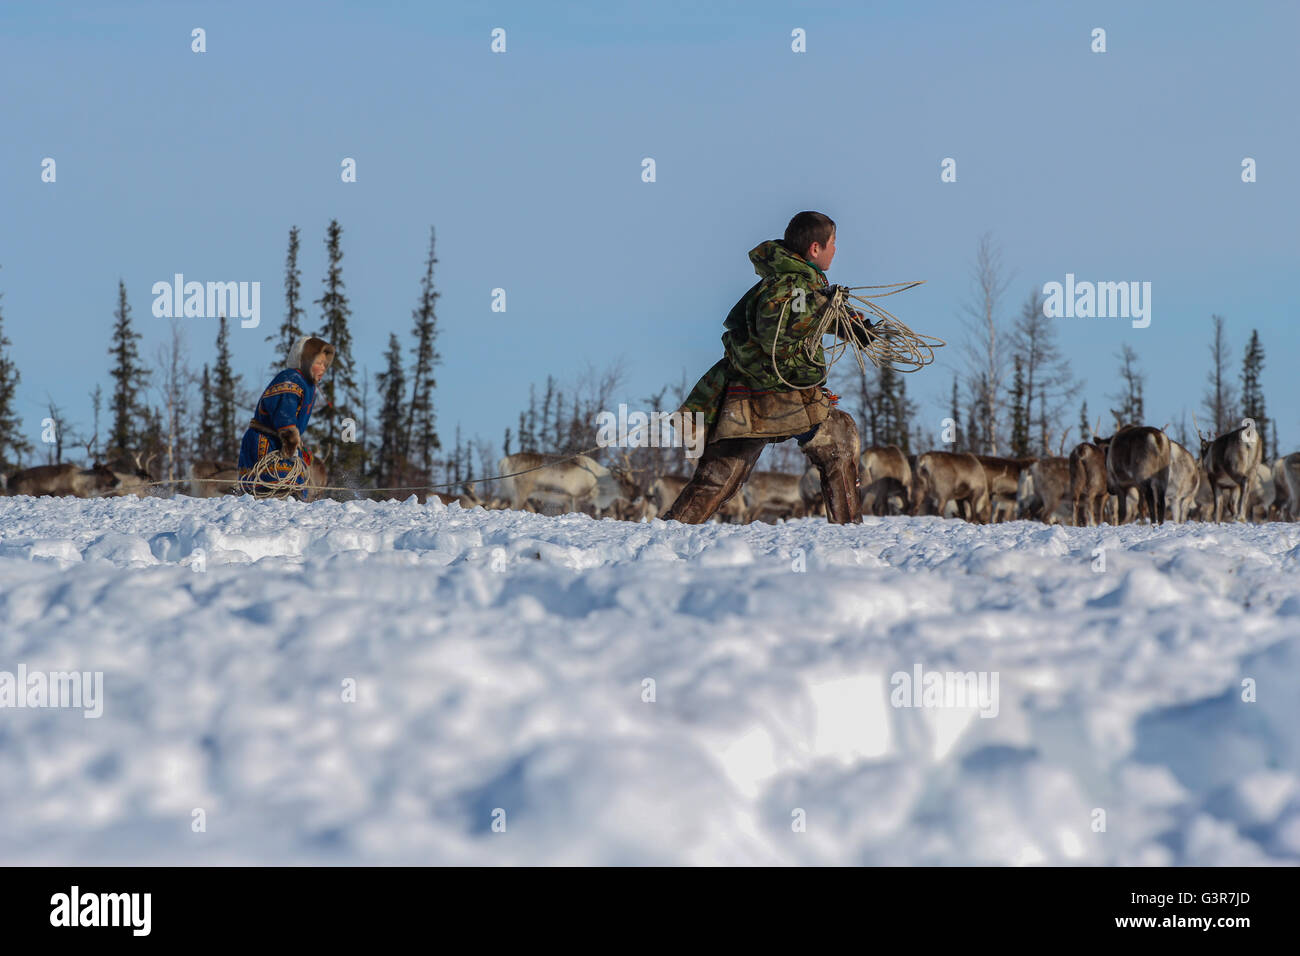 Trapping deer using arcana. Camp of reindeer herders of the Yamal tundra. Stock Photo